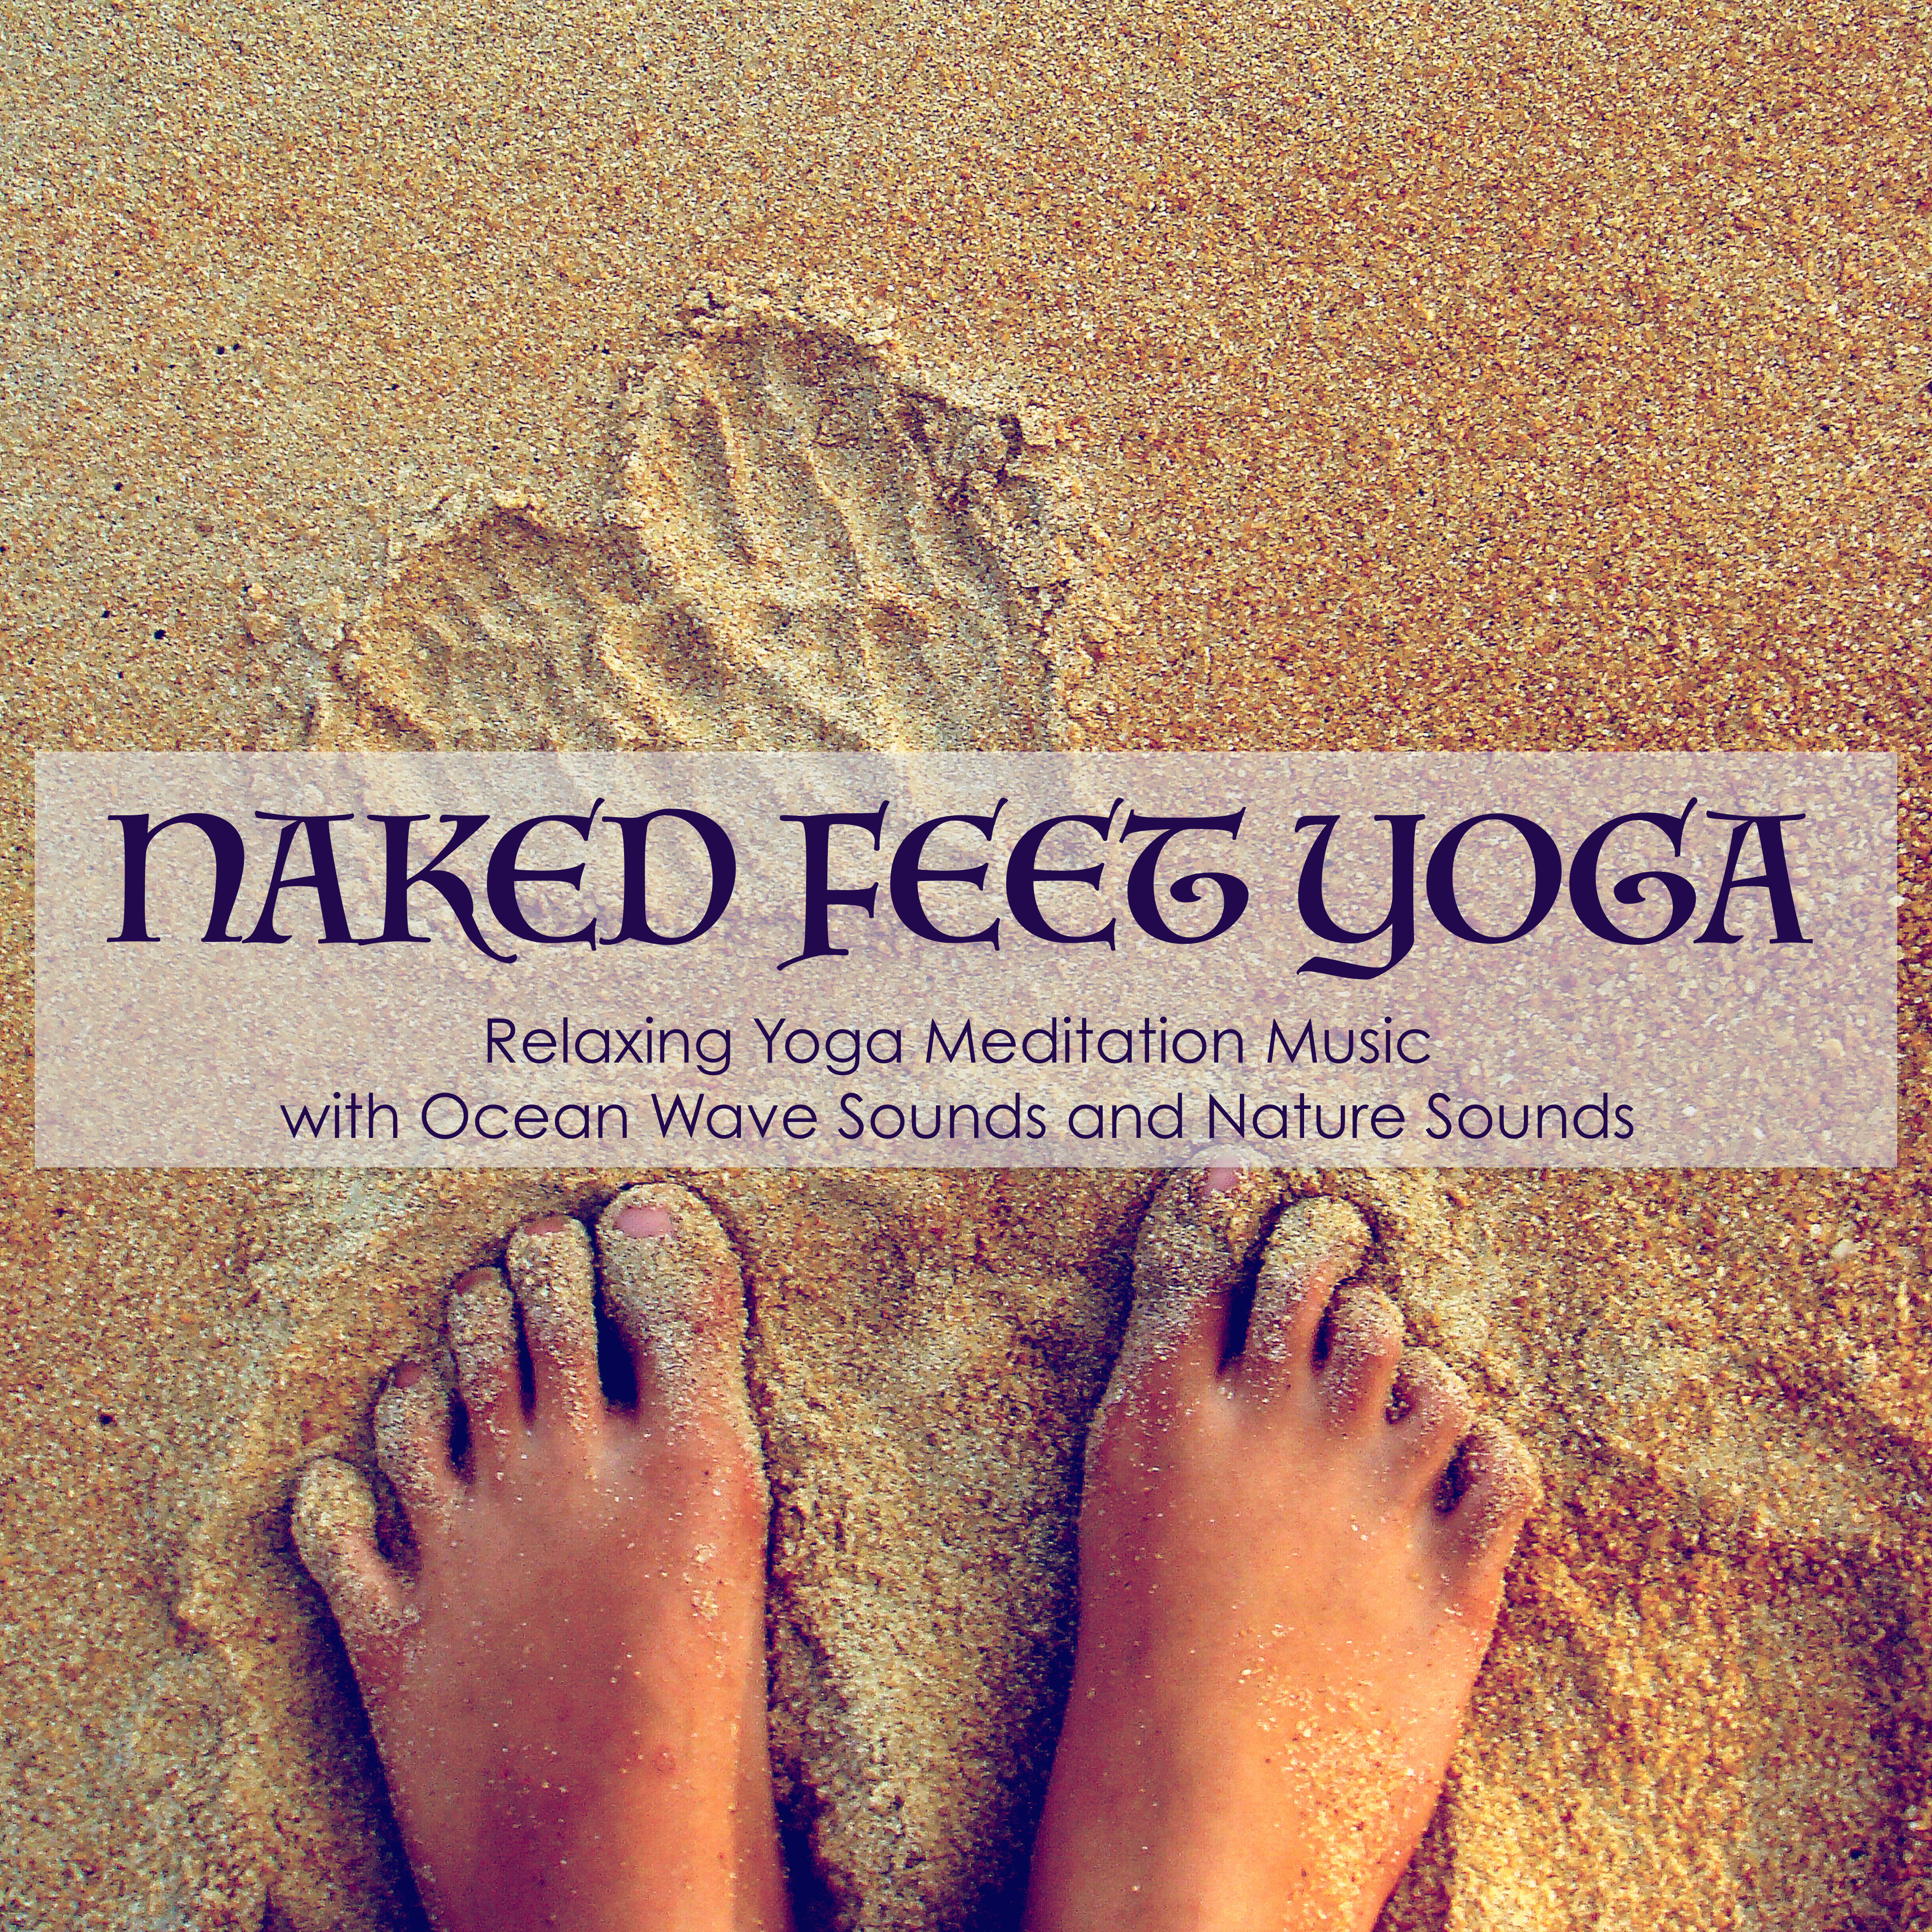 Naked Feet Yoga - Relaxing Yoga Meditation Music with Ocean Wave Sounds and Nature Sounds